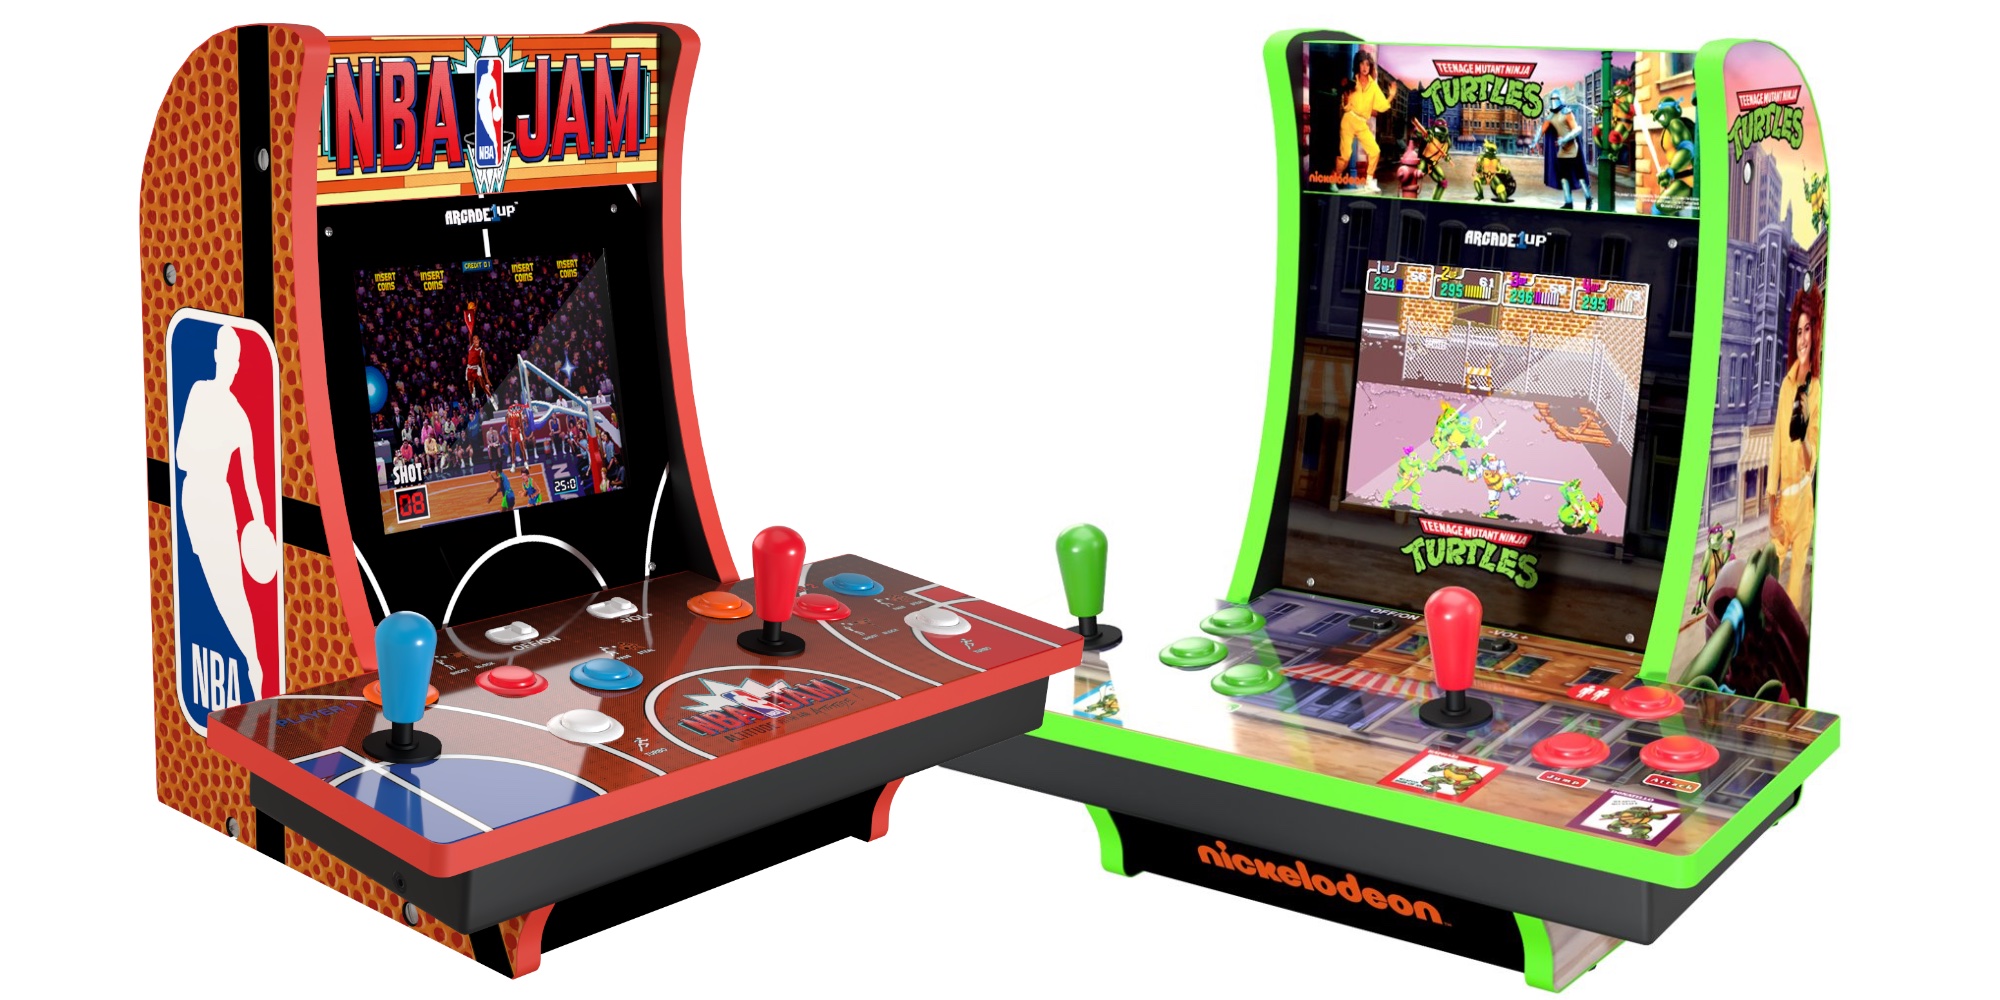 Arcade1Up twoplayer CounterCade debuts in five new styles 9to5Toys